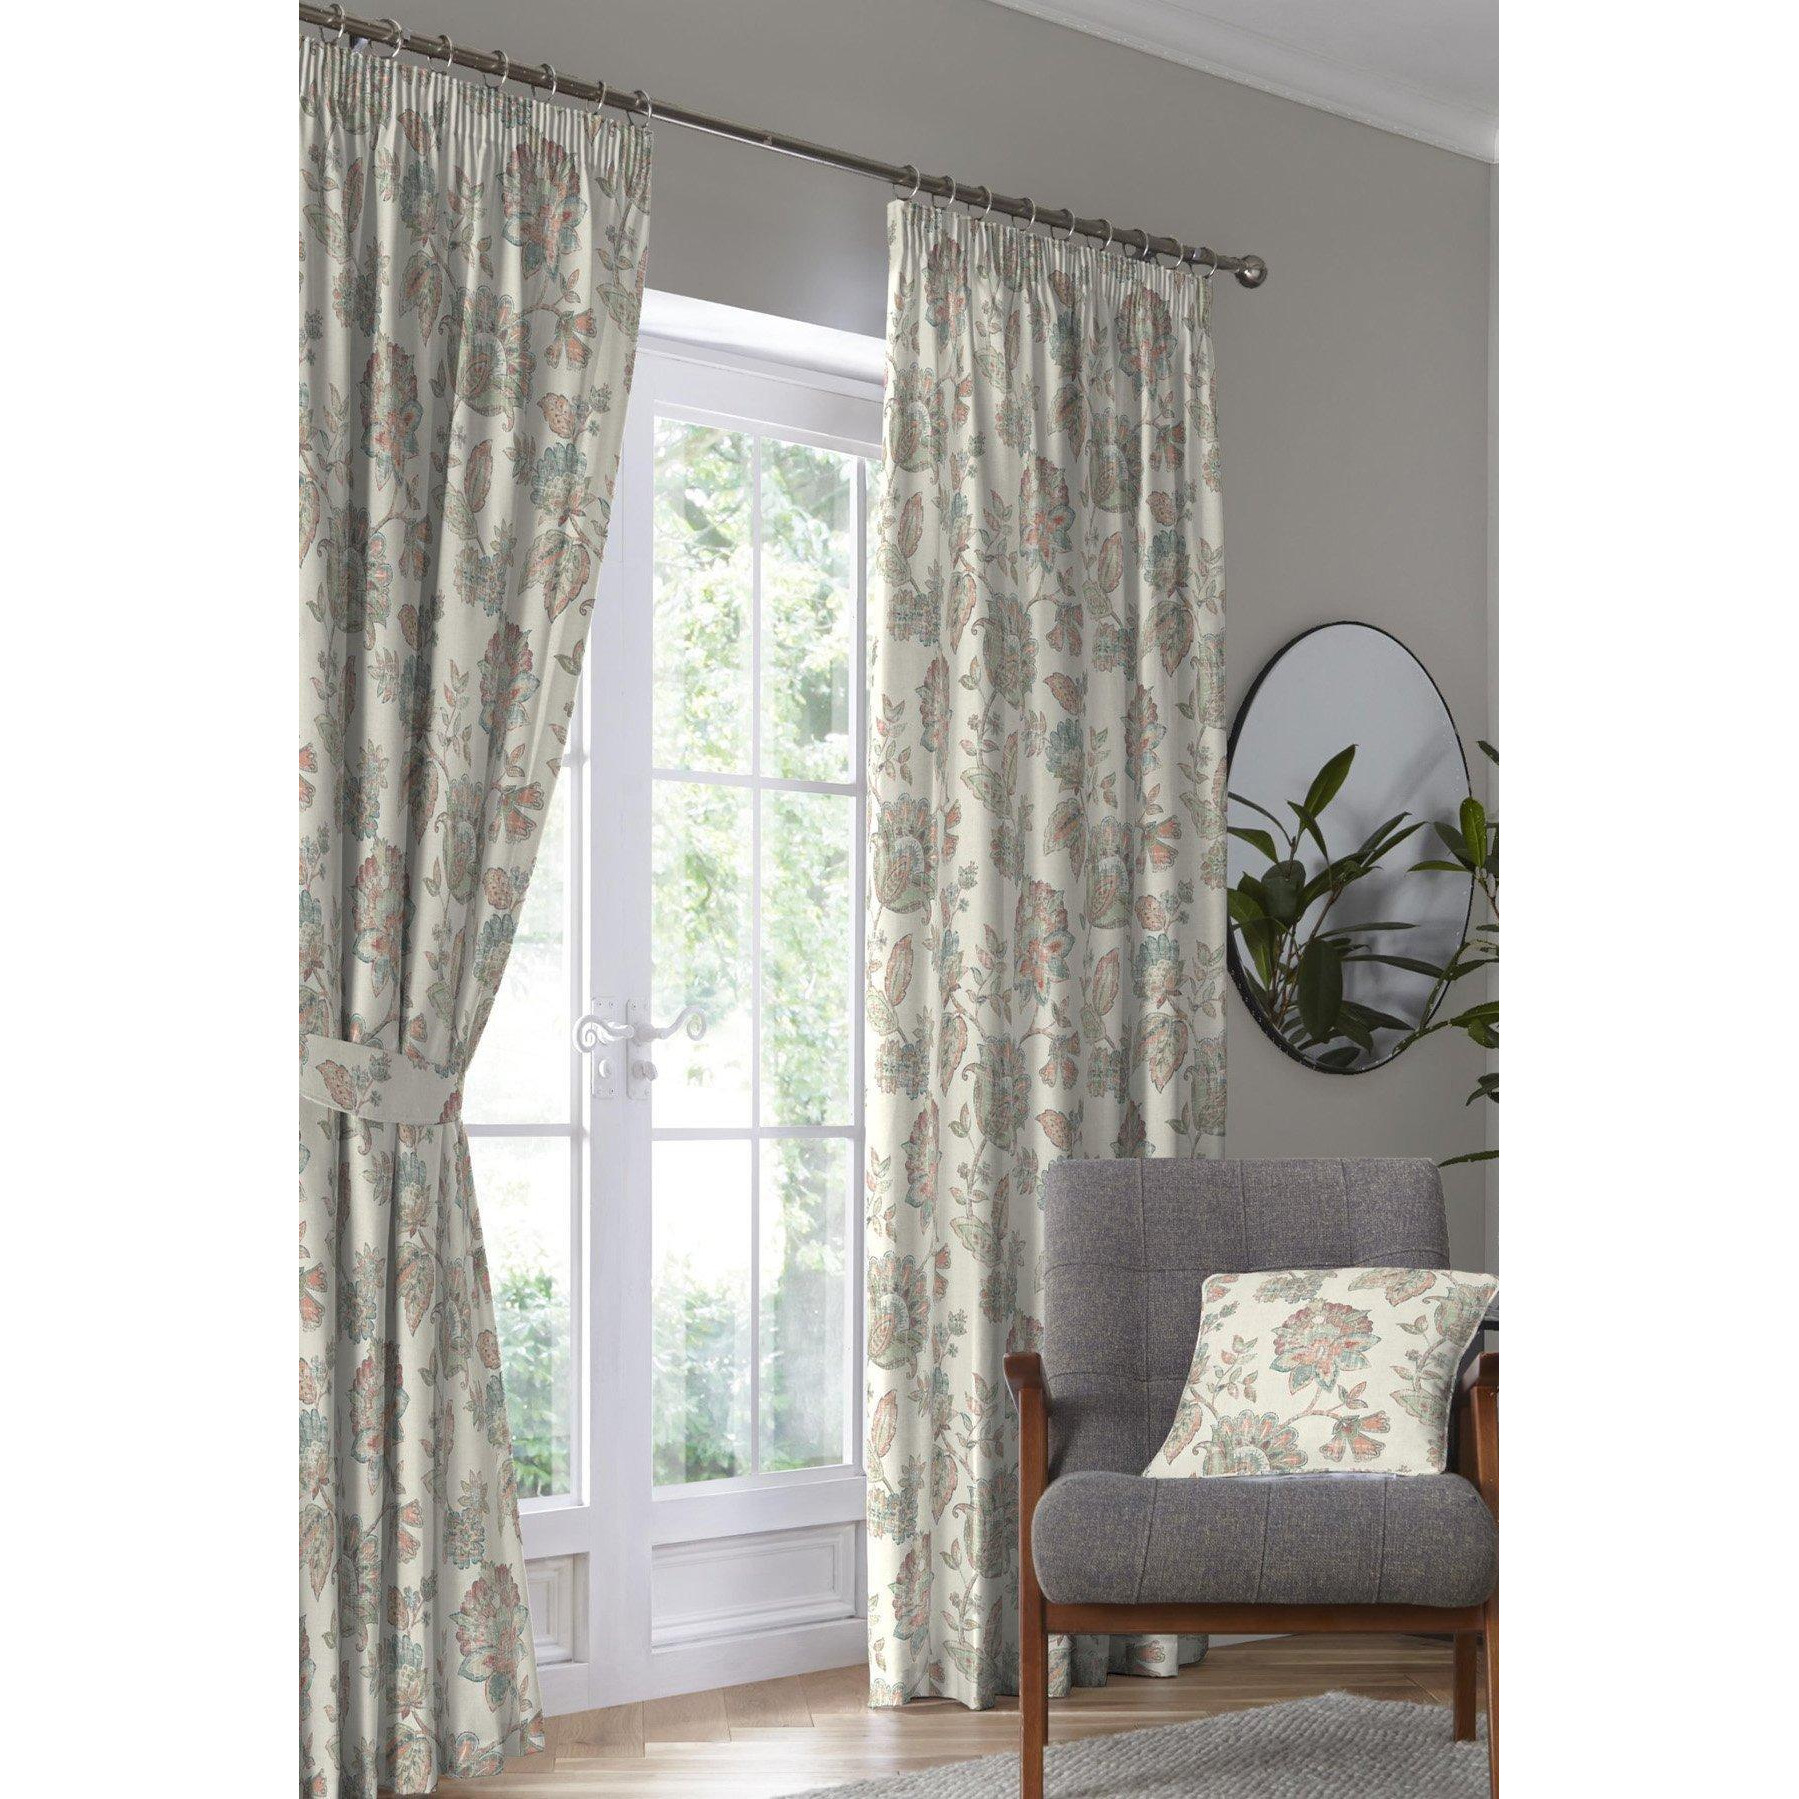 'Indira' 100% Cotton Floral Print Pair of Pencil Pleat Curtains With Tie-Backs - image 1